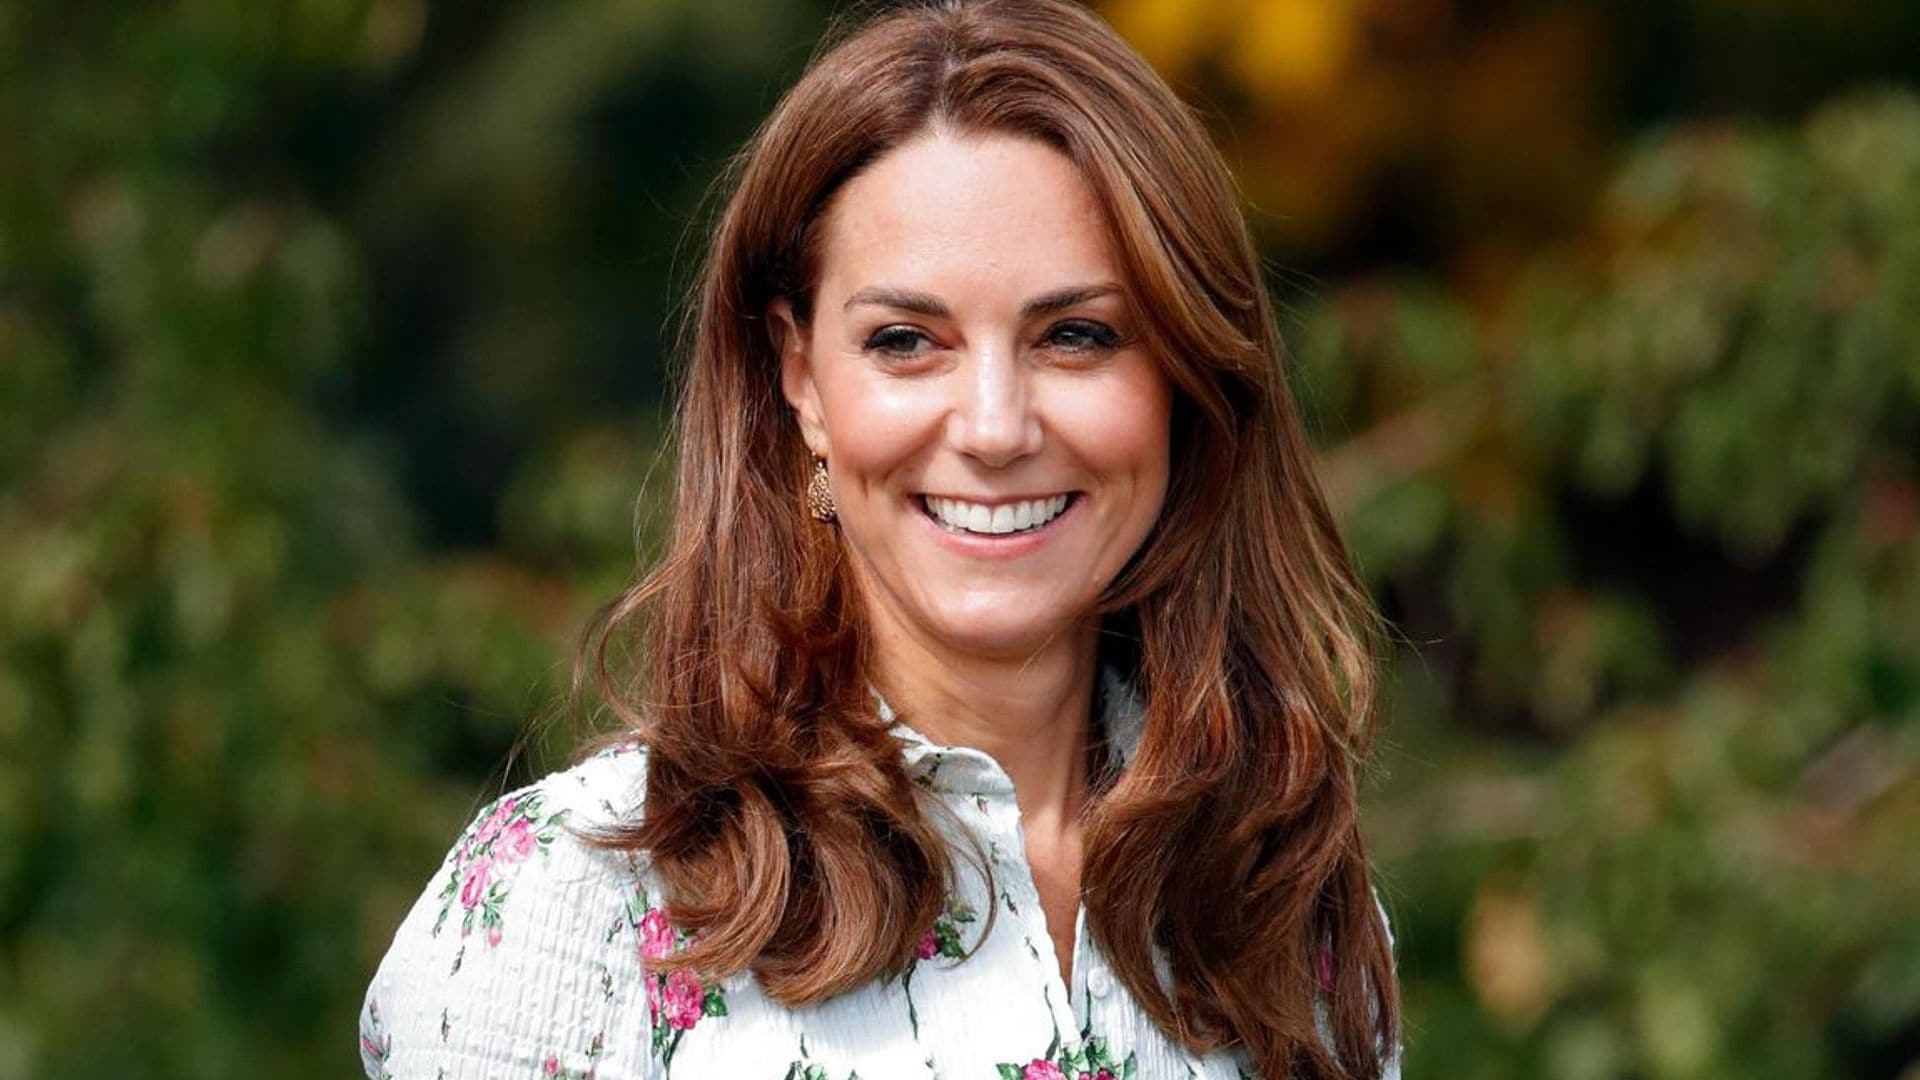 The minimalist brand that has a special place in Kate Middleton’s closet